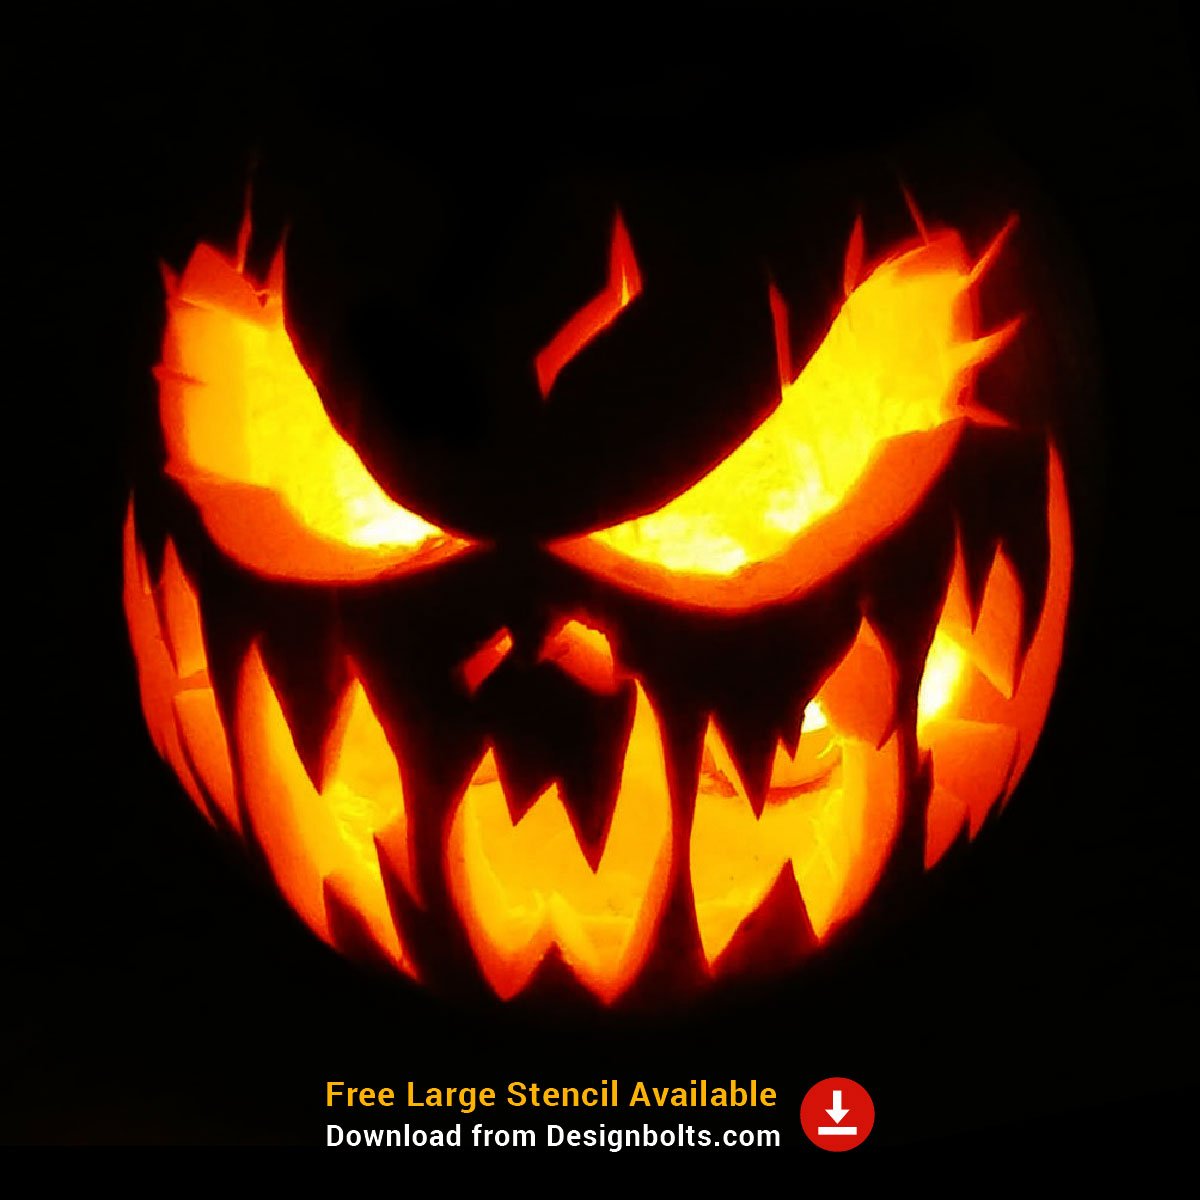 25-selected-best-creative-scary-pumpkin-carving-ideas-2019